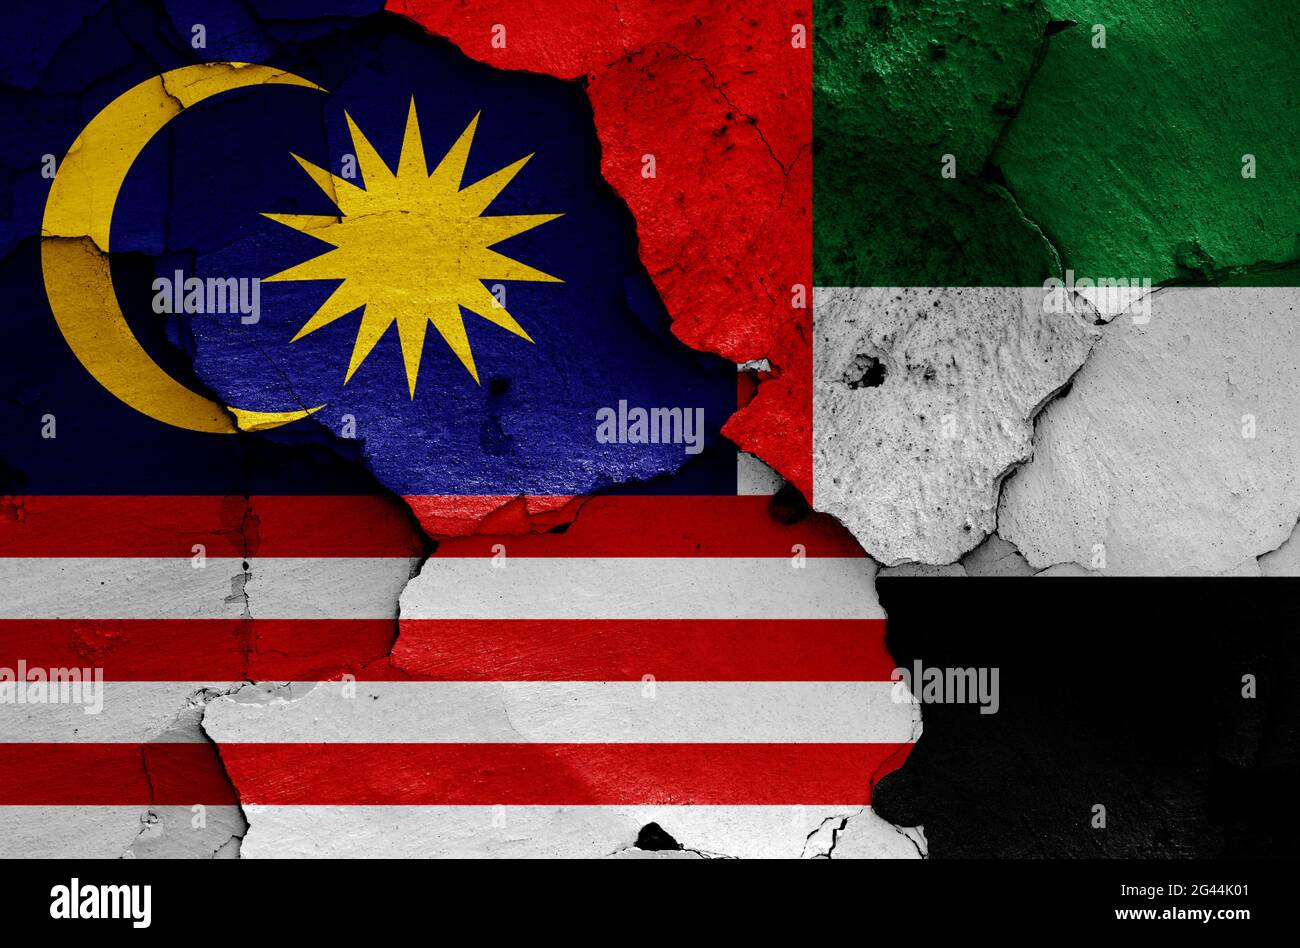 Flags of Malaysia and UAE painted on cracked wall Stock Photo